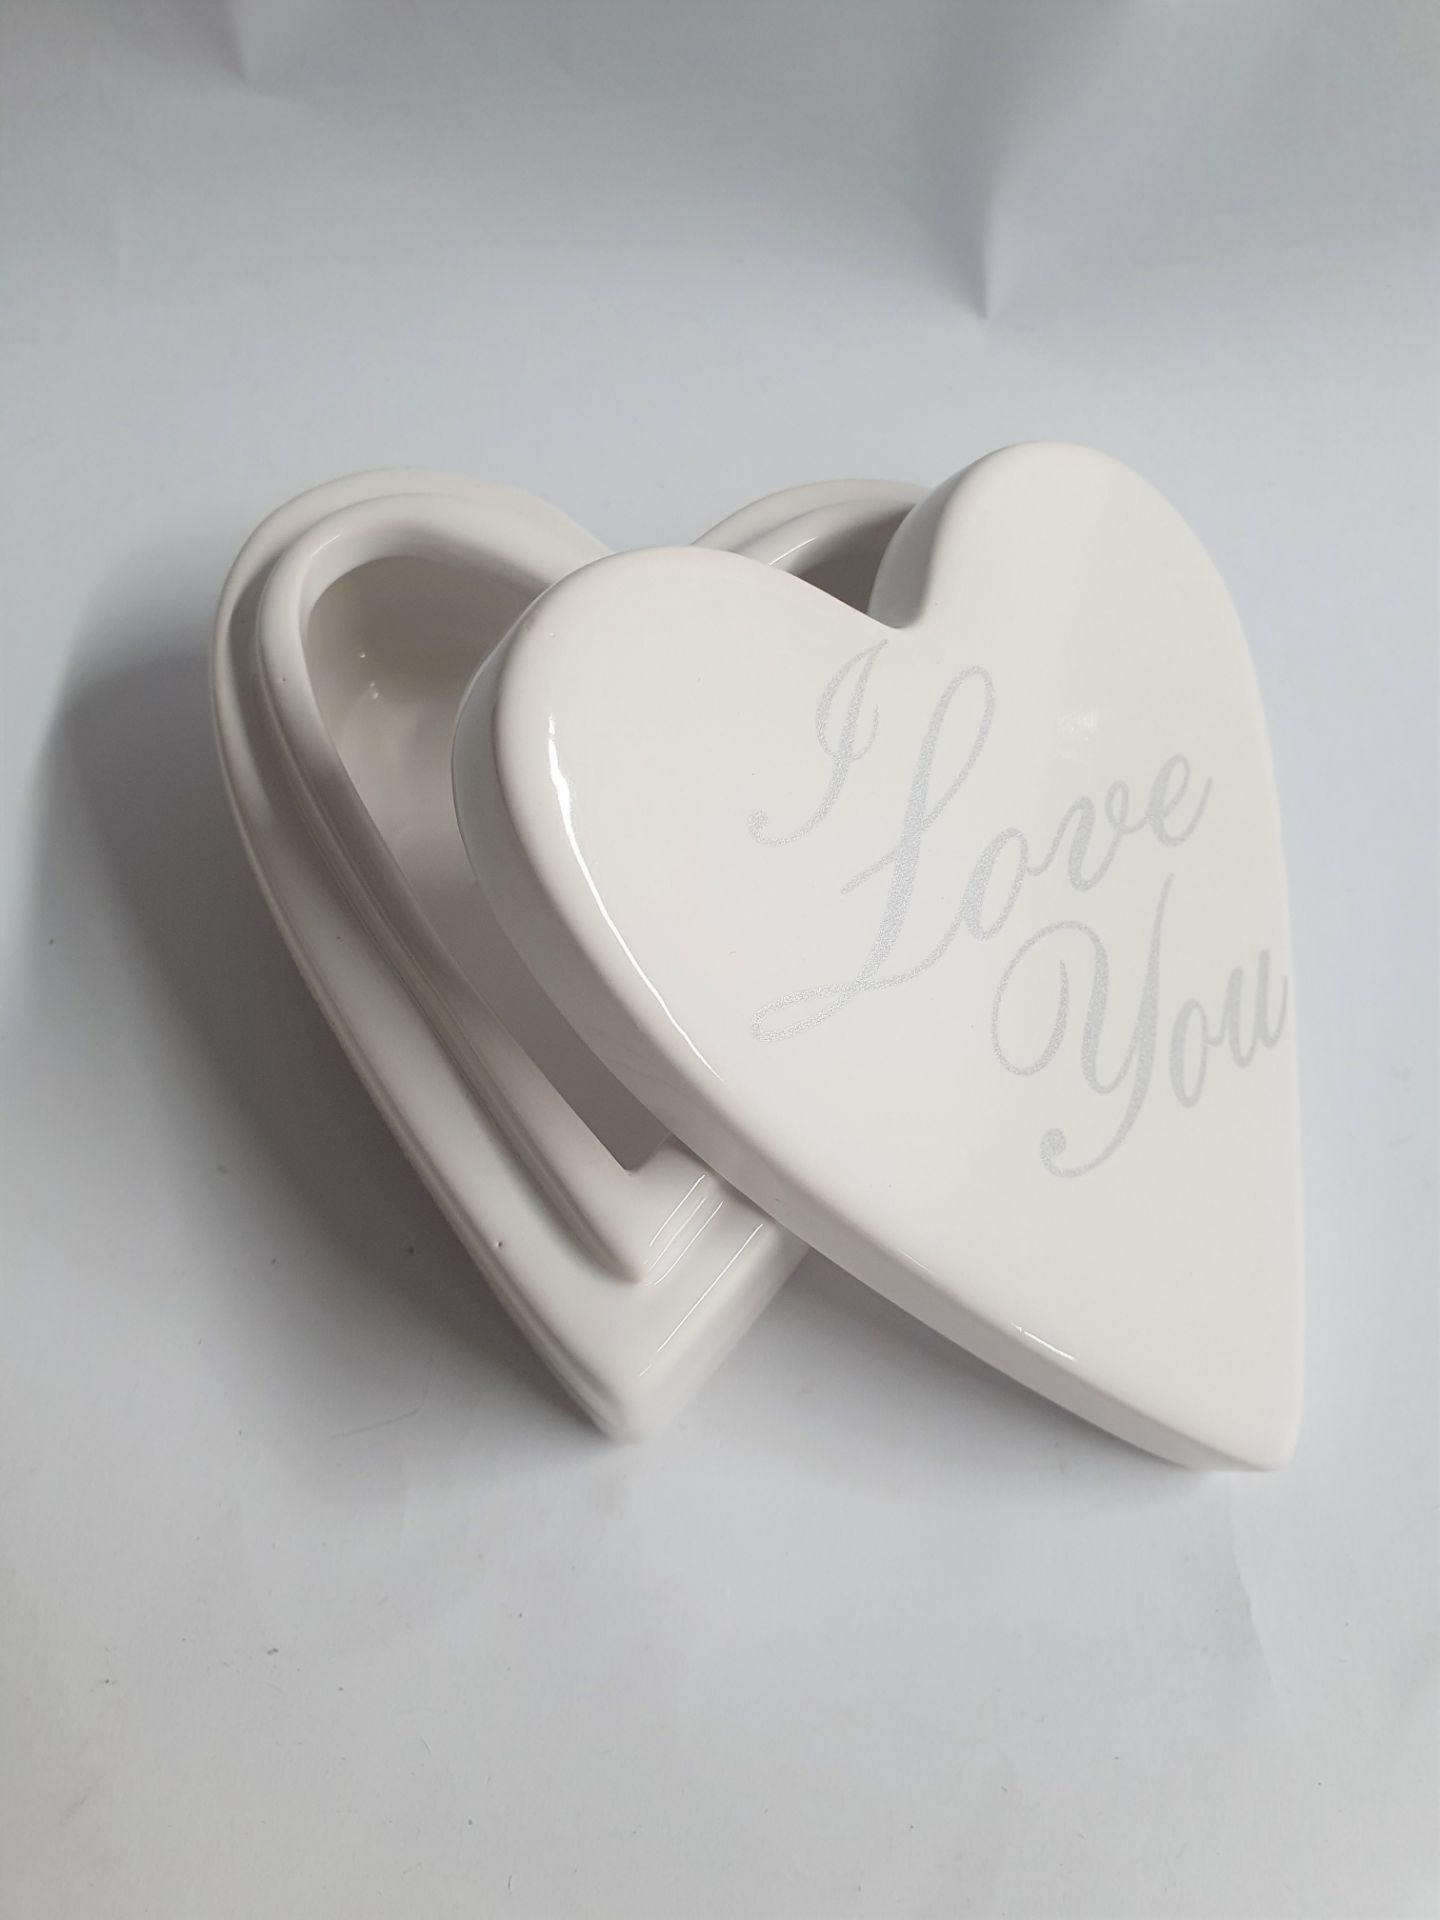 4 x Sets of Ceramic Trinket Boxes | Heart Shaped - Image 3 of 5